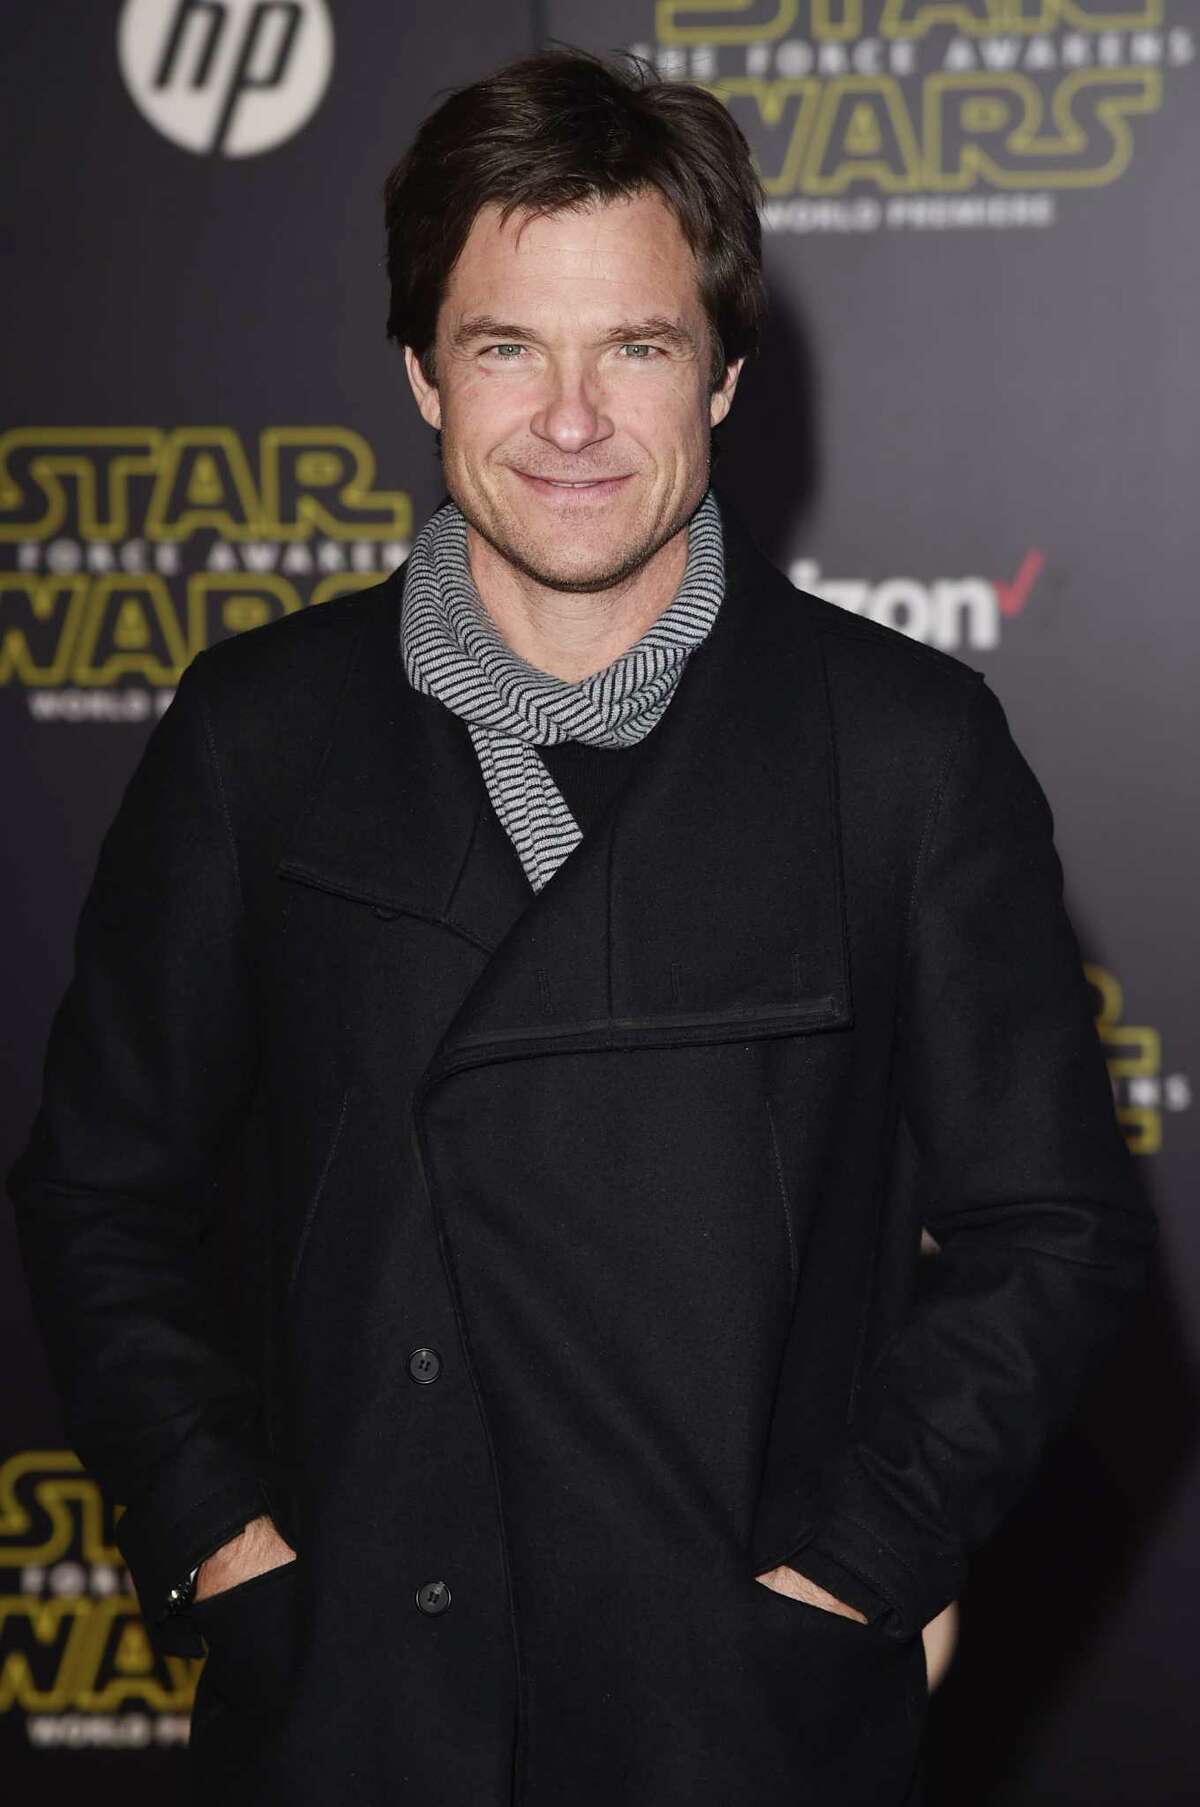 HOLLYWOOD, CA - DECEMBER 14: Actor Jason Bateman attends Premiere of Walt Disney Pictures and Lucasfilm's "Star Wars: The Force Awakens" on December 14, 2015 in Hollywood, California. (Photo by Jason Merritt/Getty Images) ORG XMIT: 584247853